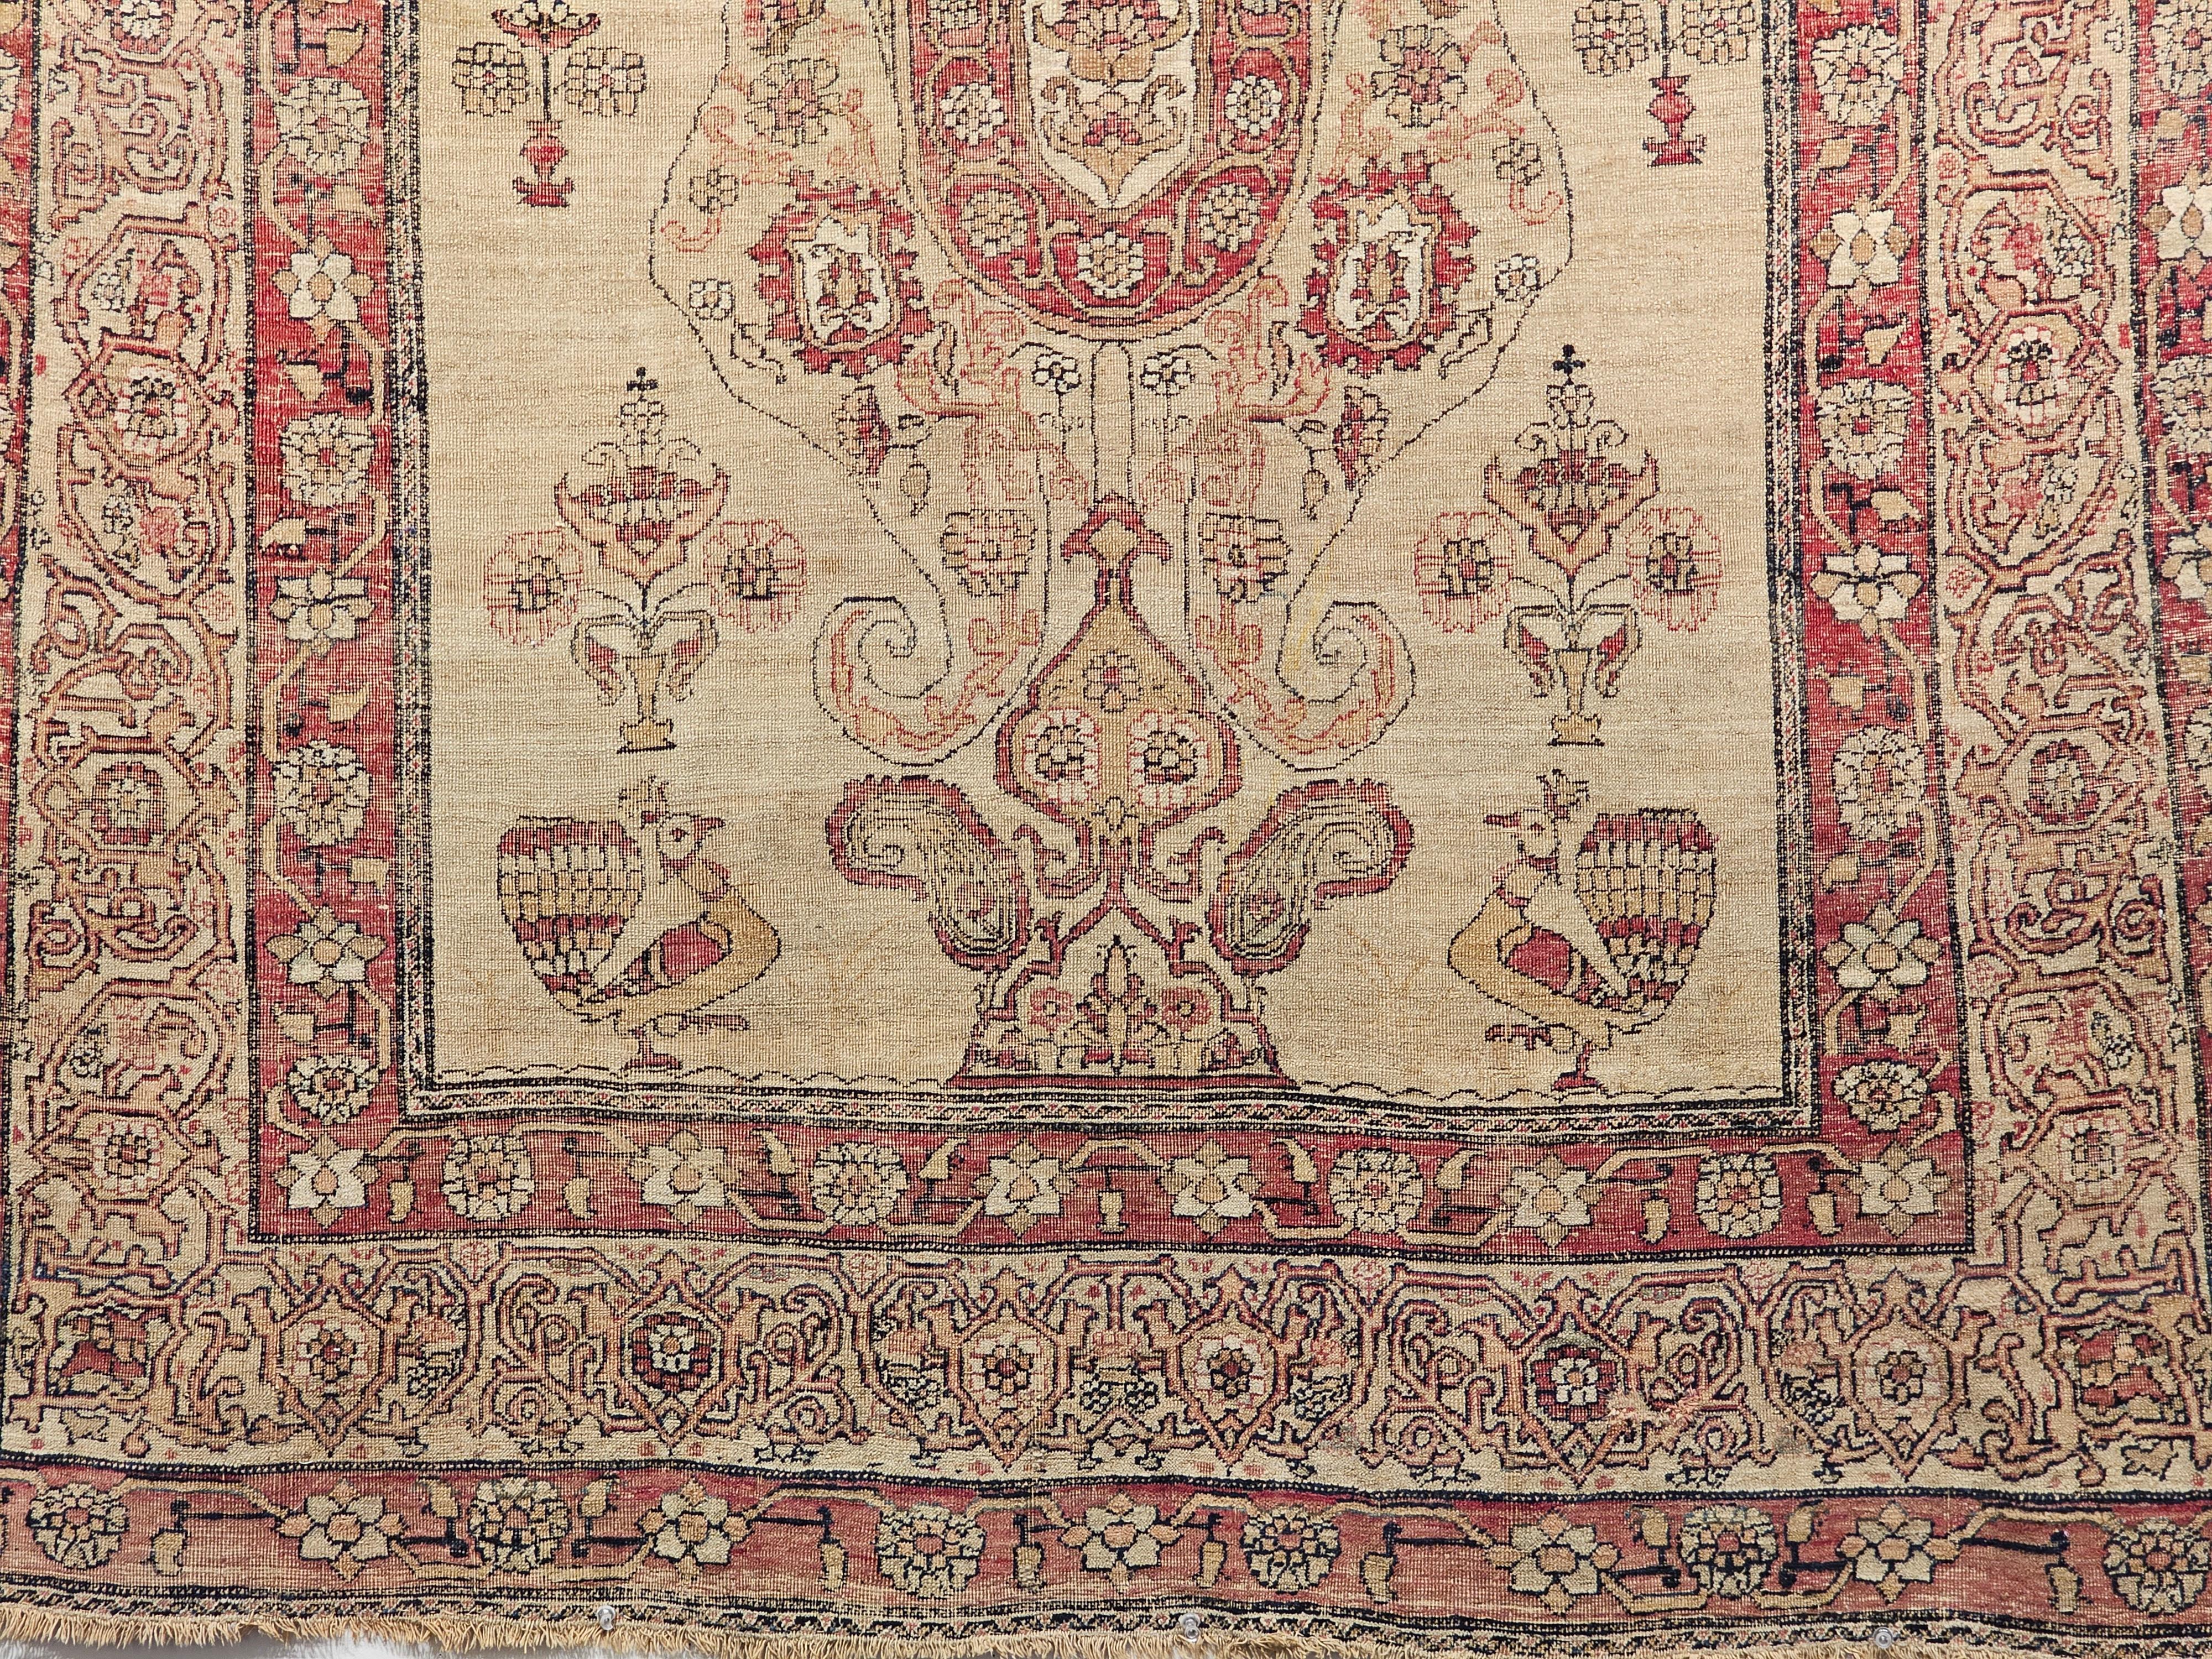 19th Century Persian Kerman Lavar Pictorial “Tree of Life” Rug in Camel, Red In Good Condition For Sale In Barrington, IL